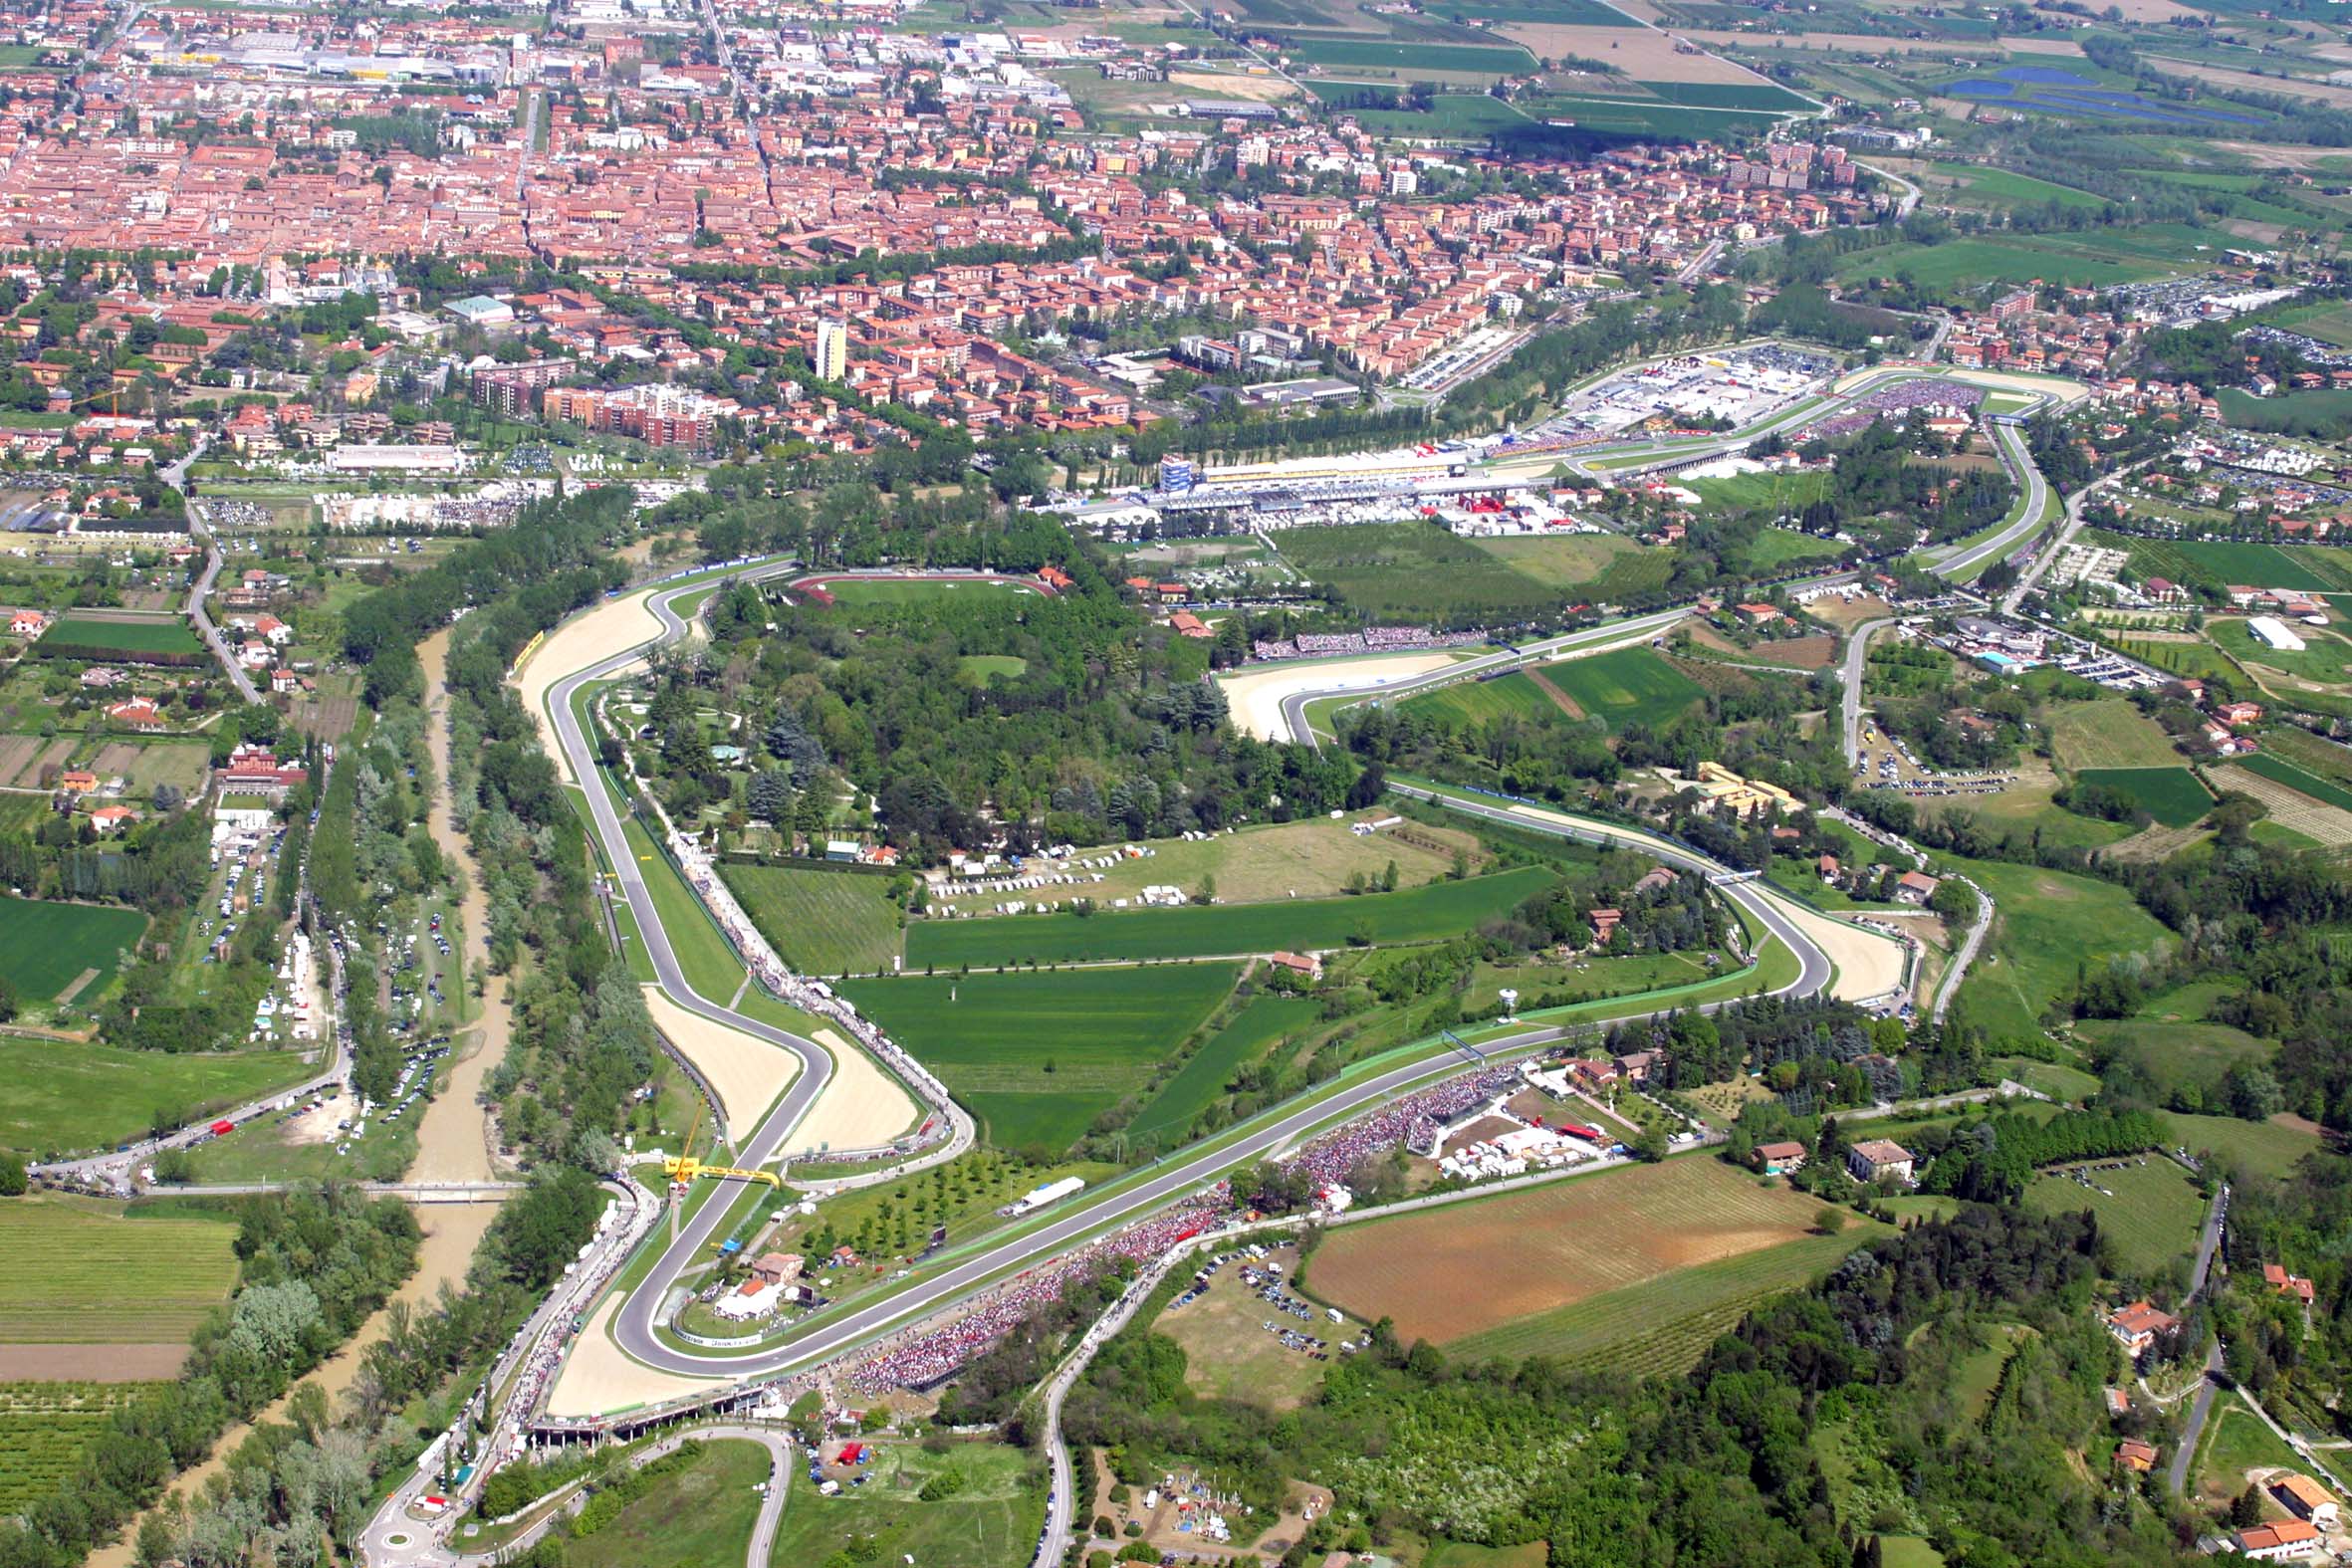 Will The Italian Grand Prix Be Held At Imola Instead Of Monza Next Year? It Looks Likely…